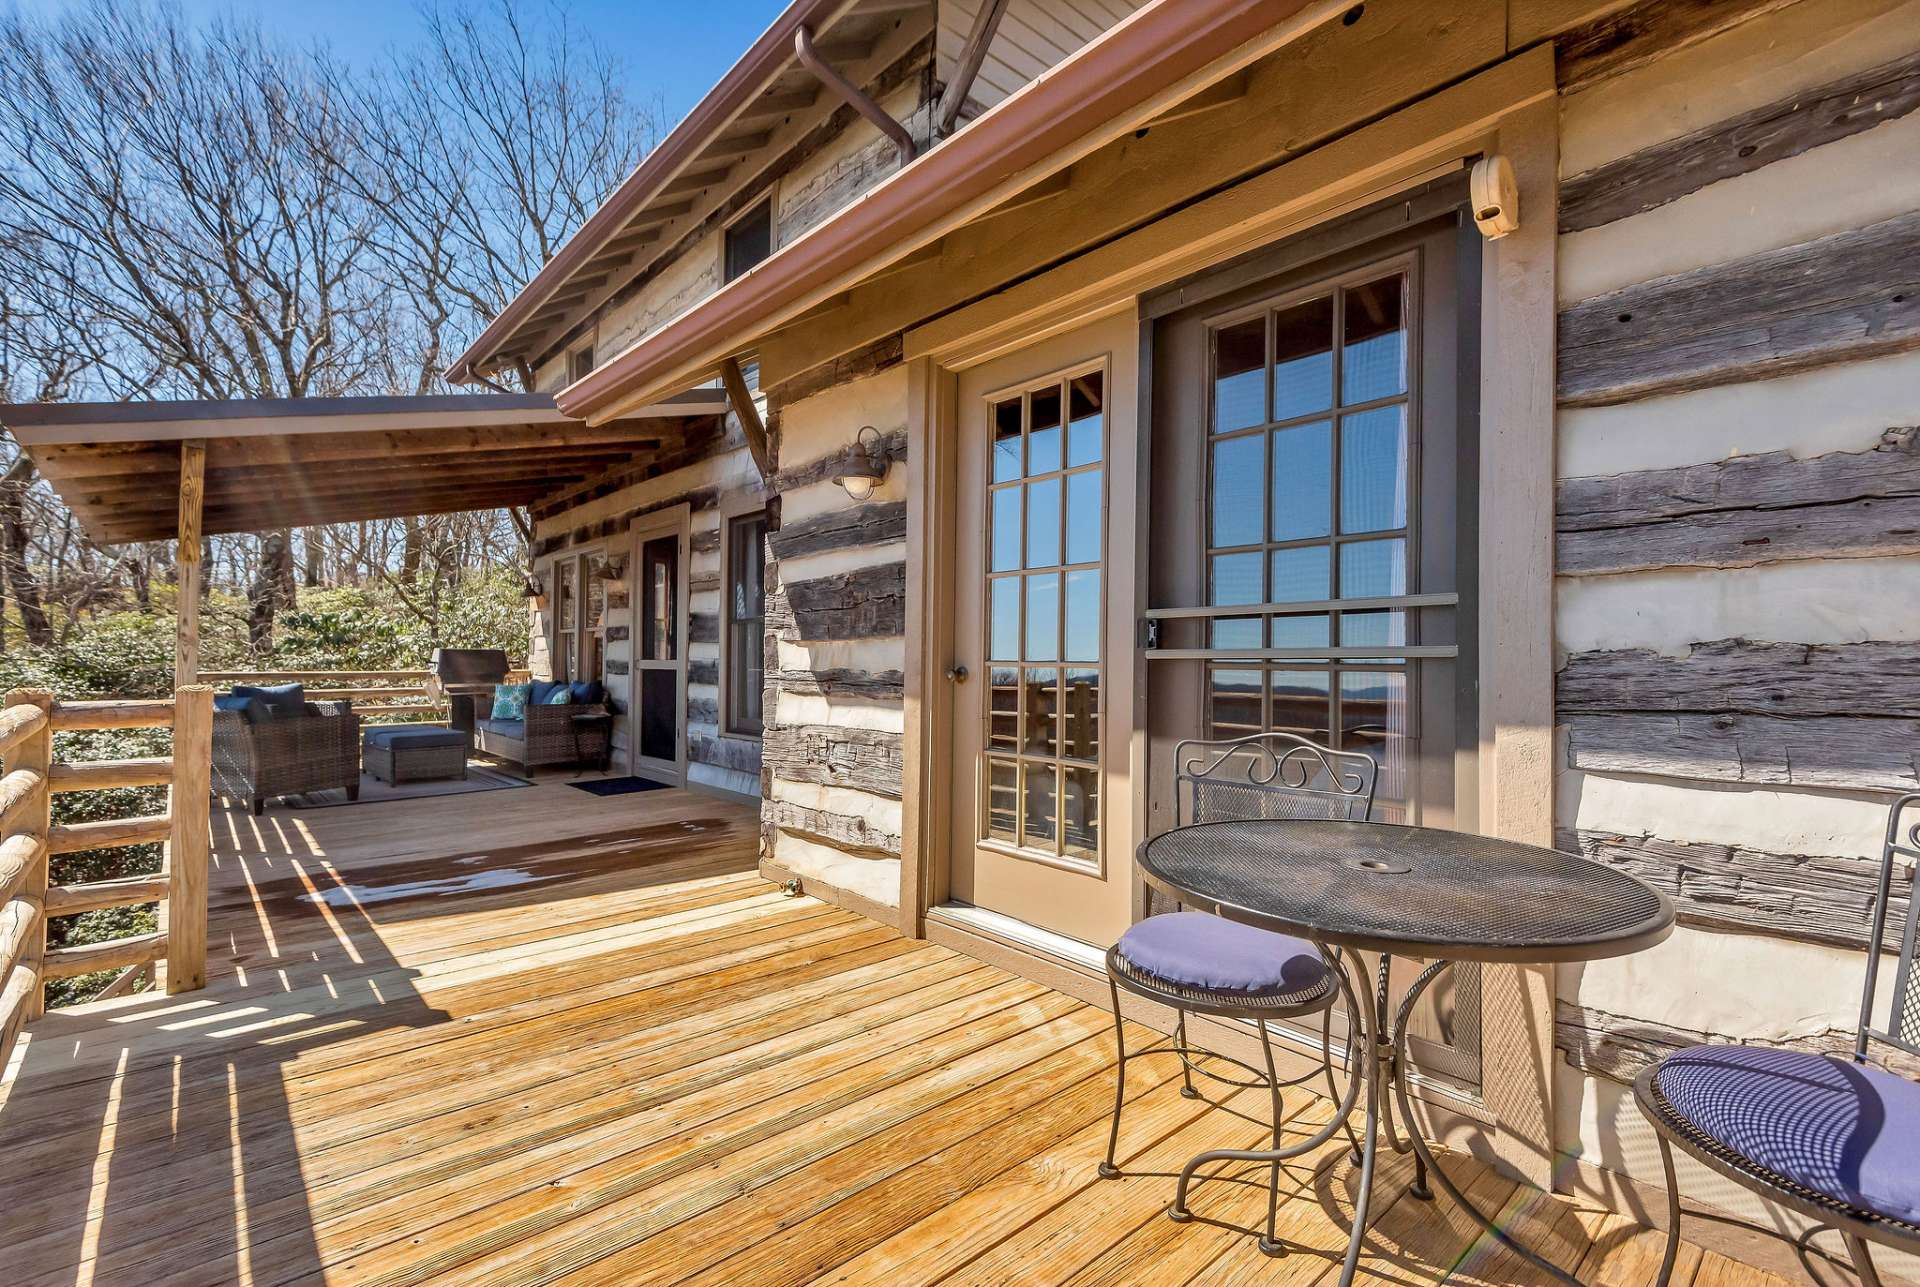 Easy access to the back deck from both the great room and primary suite.